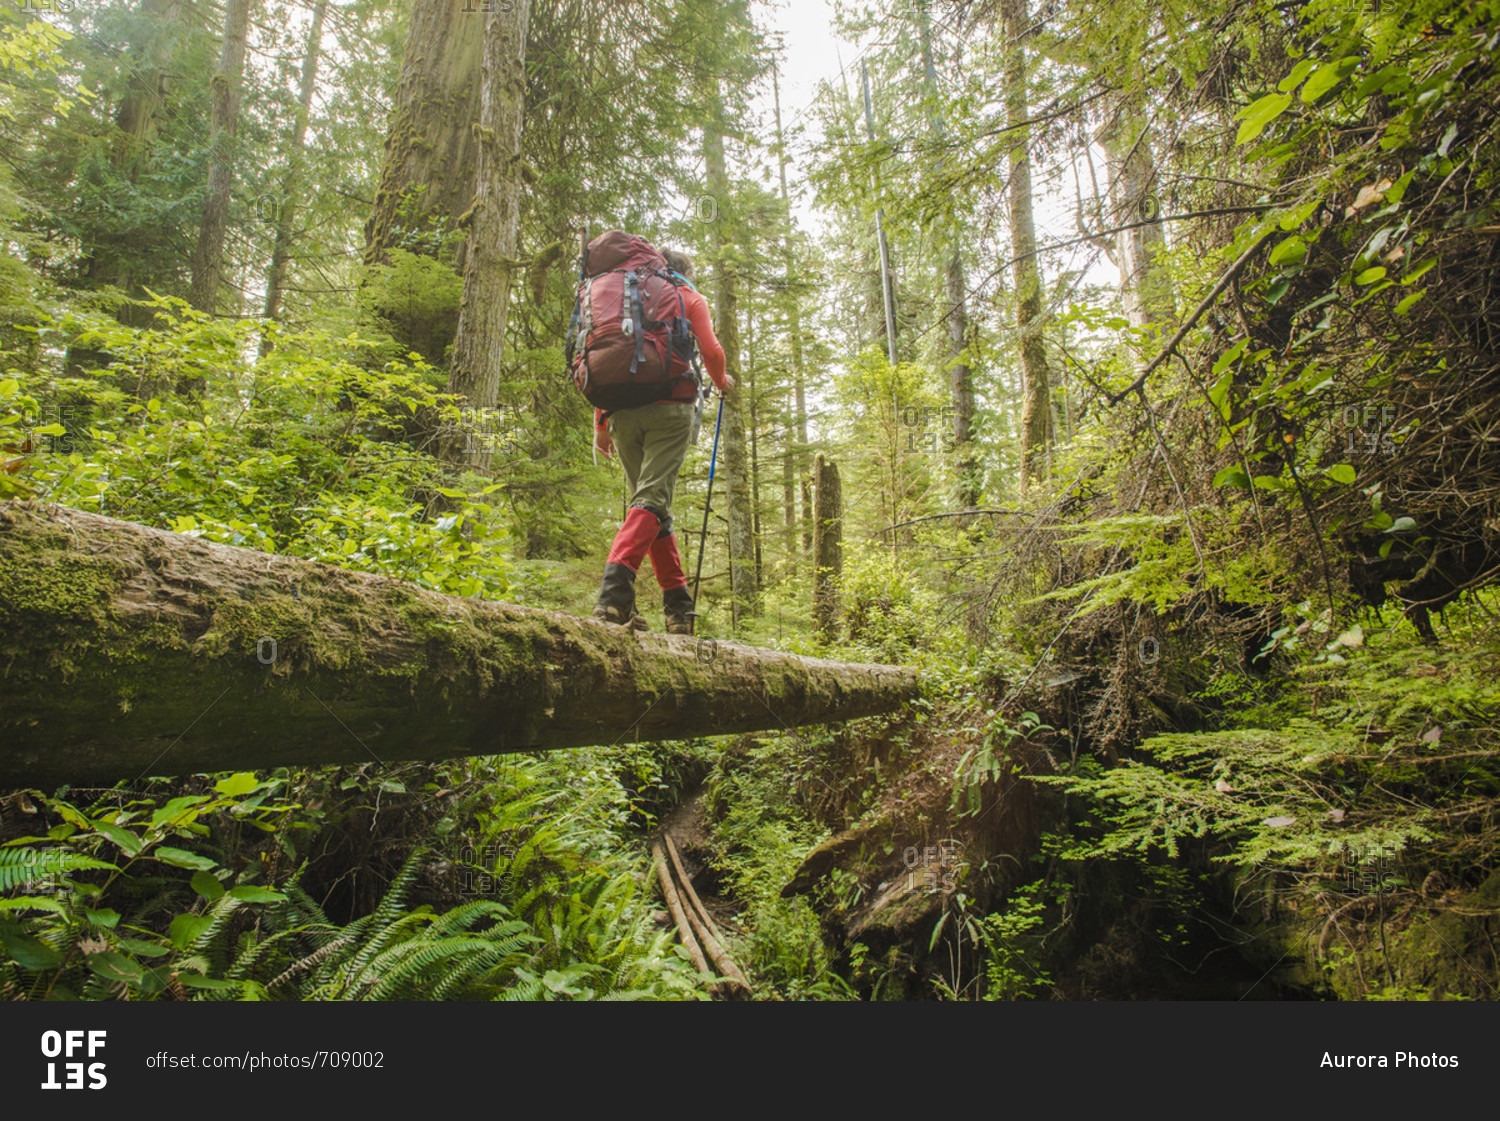 Backpacker hiking along fallen tree in forest, West Coast Trail, British Columbia, Canada